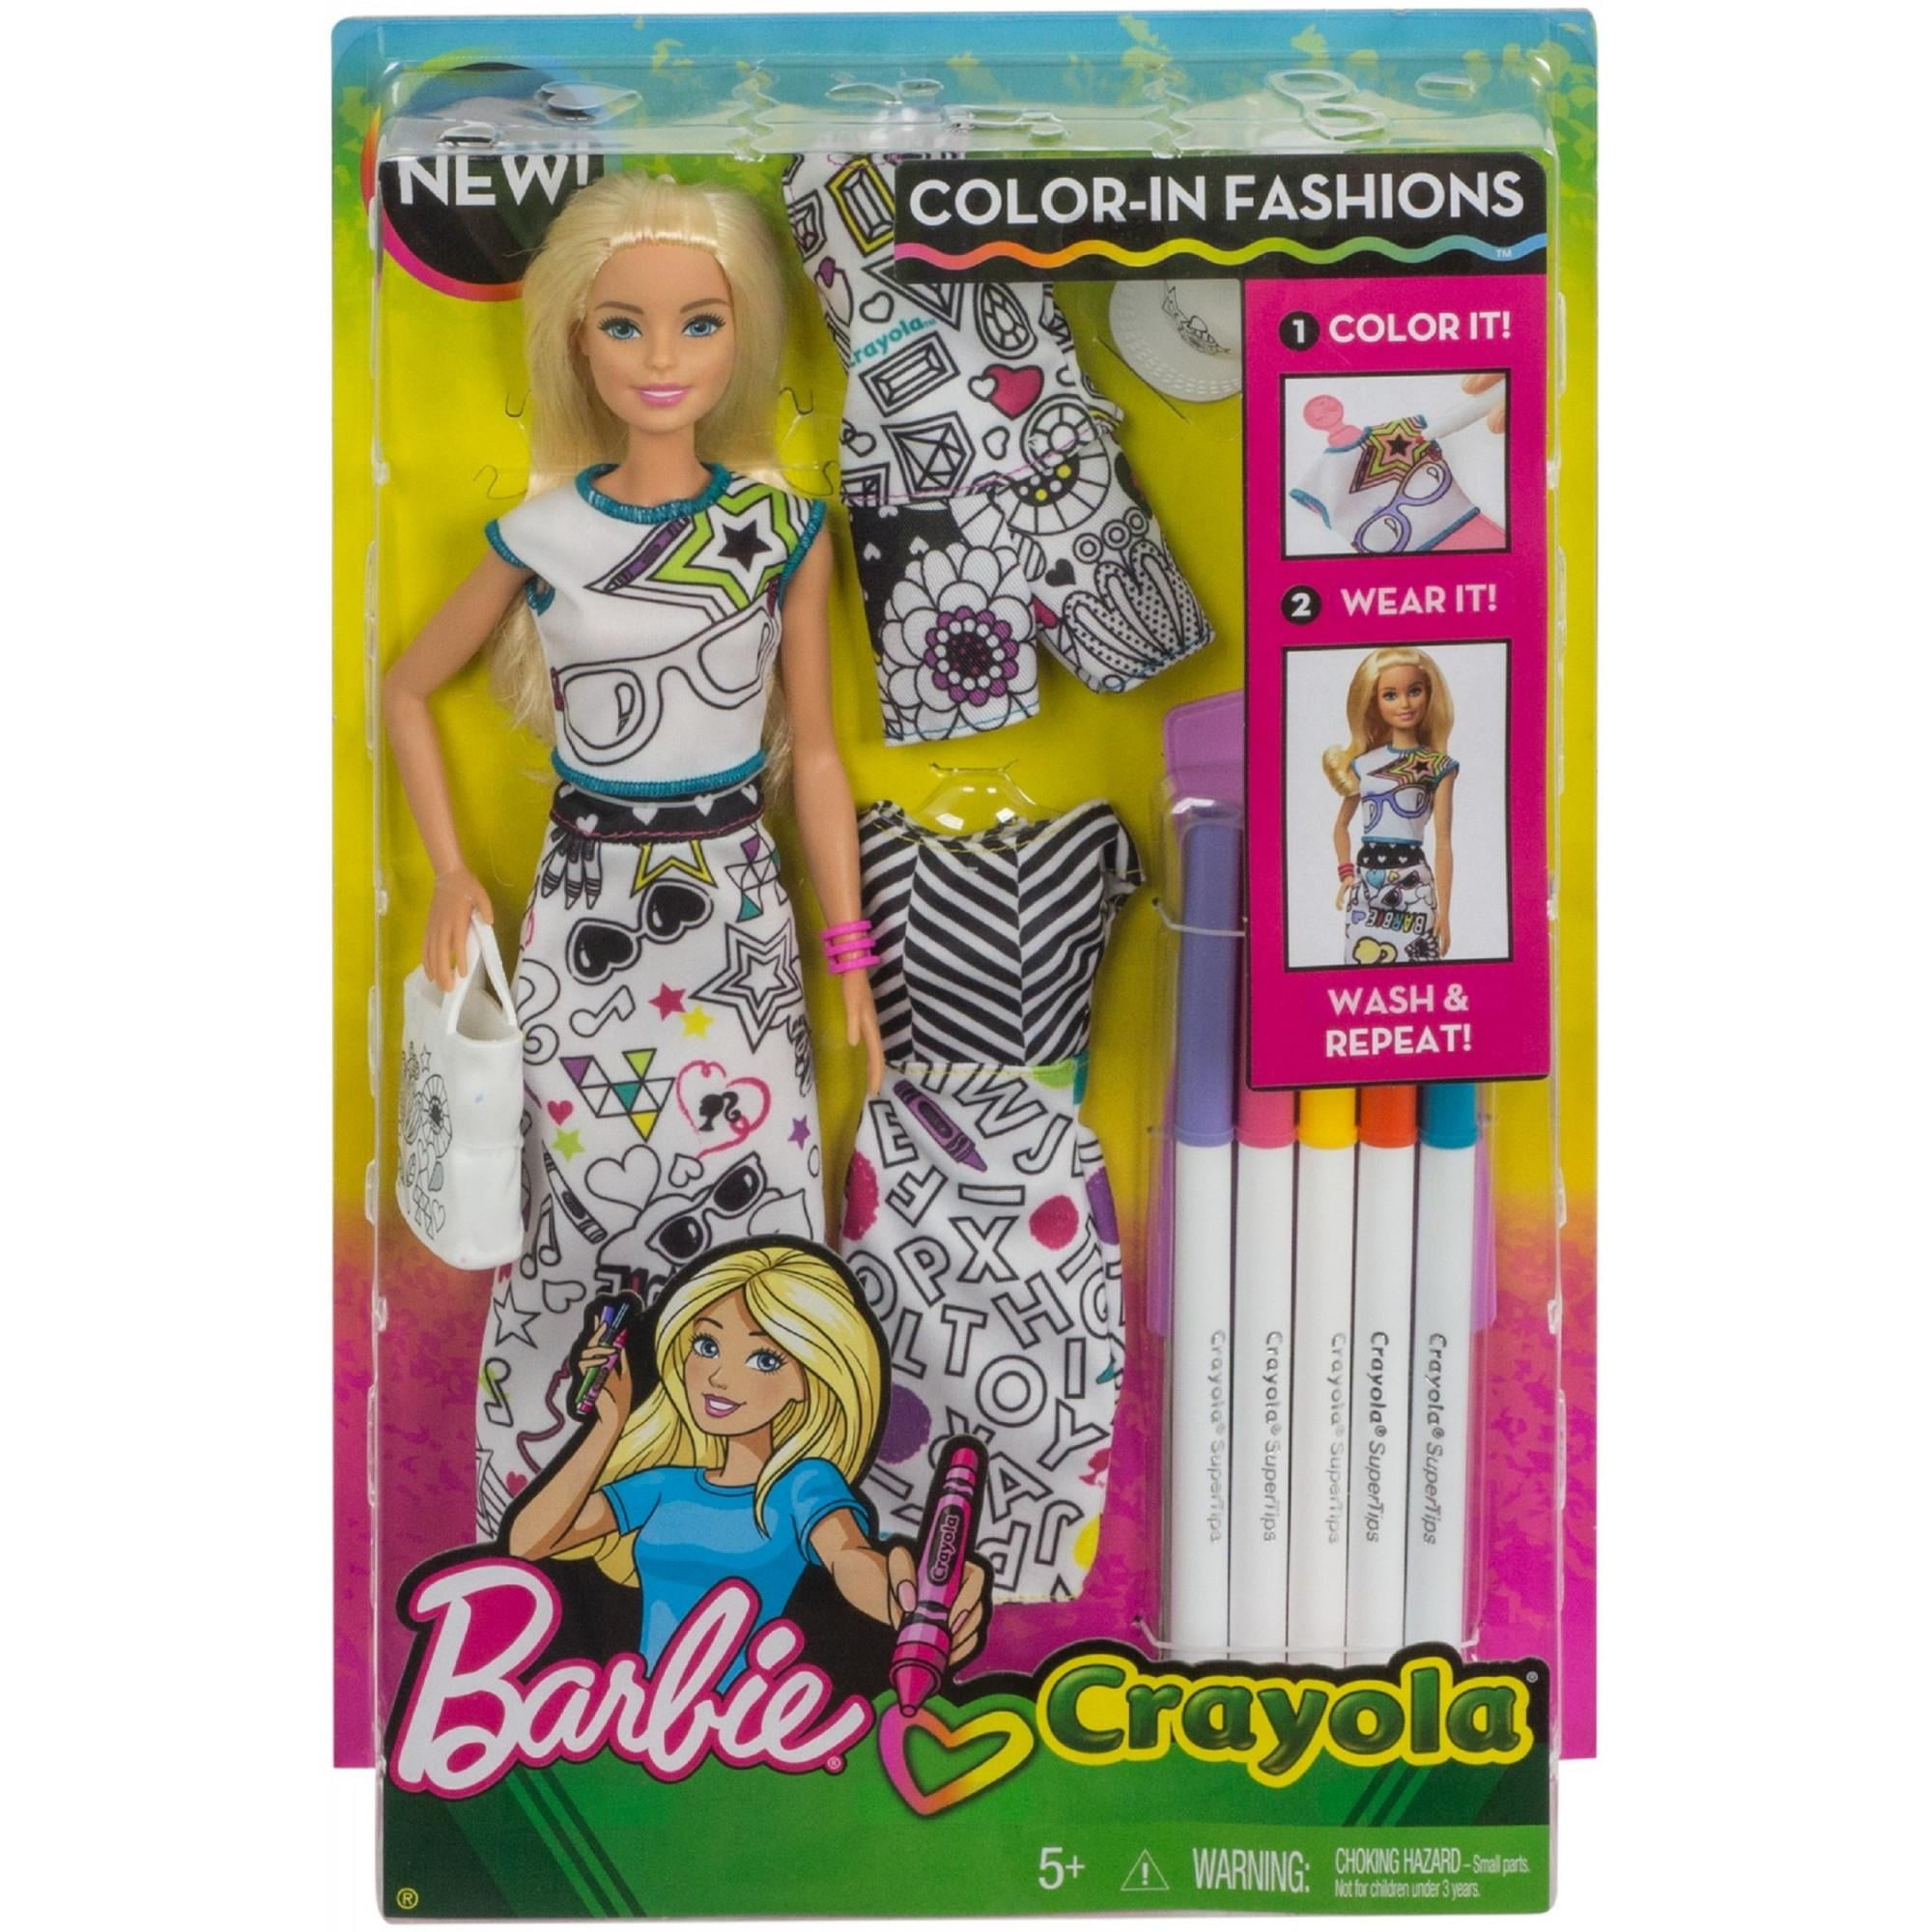 Barbie Crayola Color-in Fashions Doll 